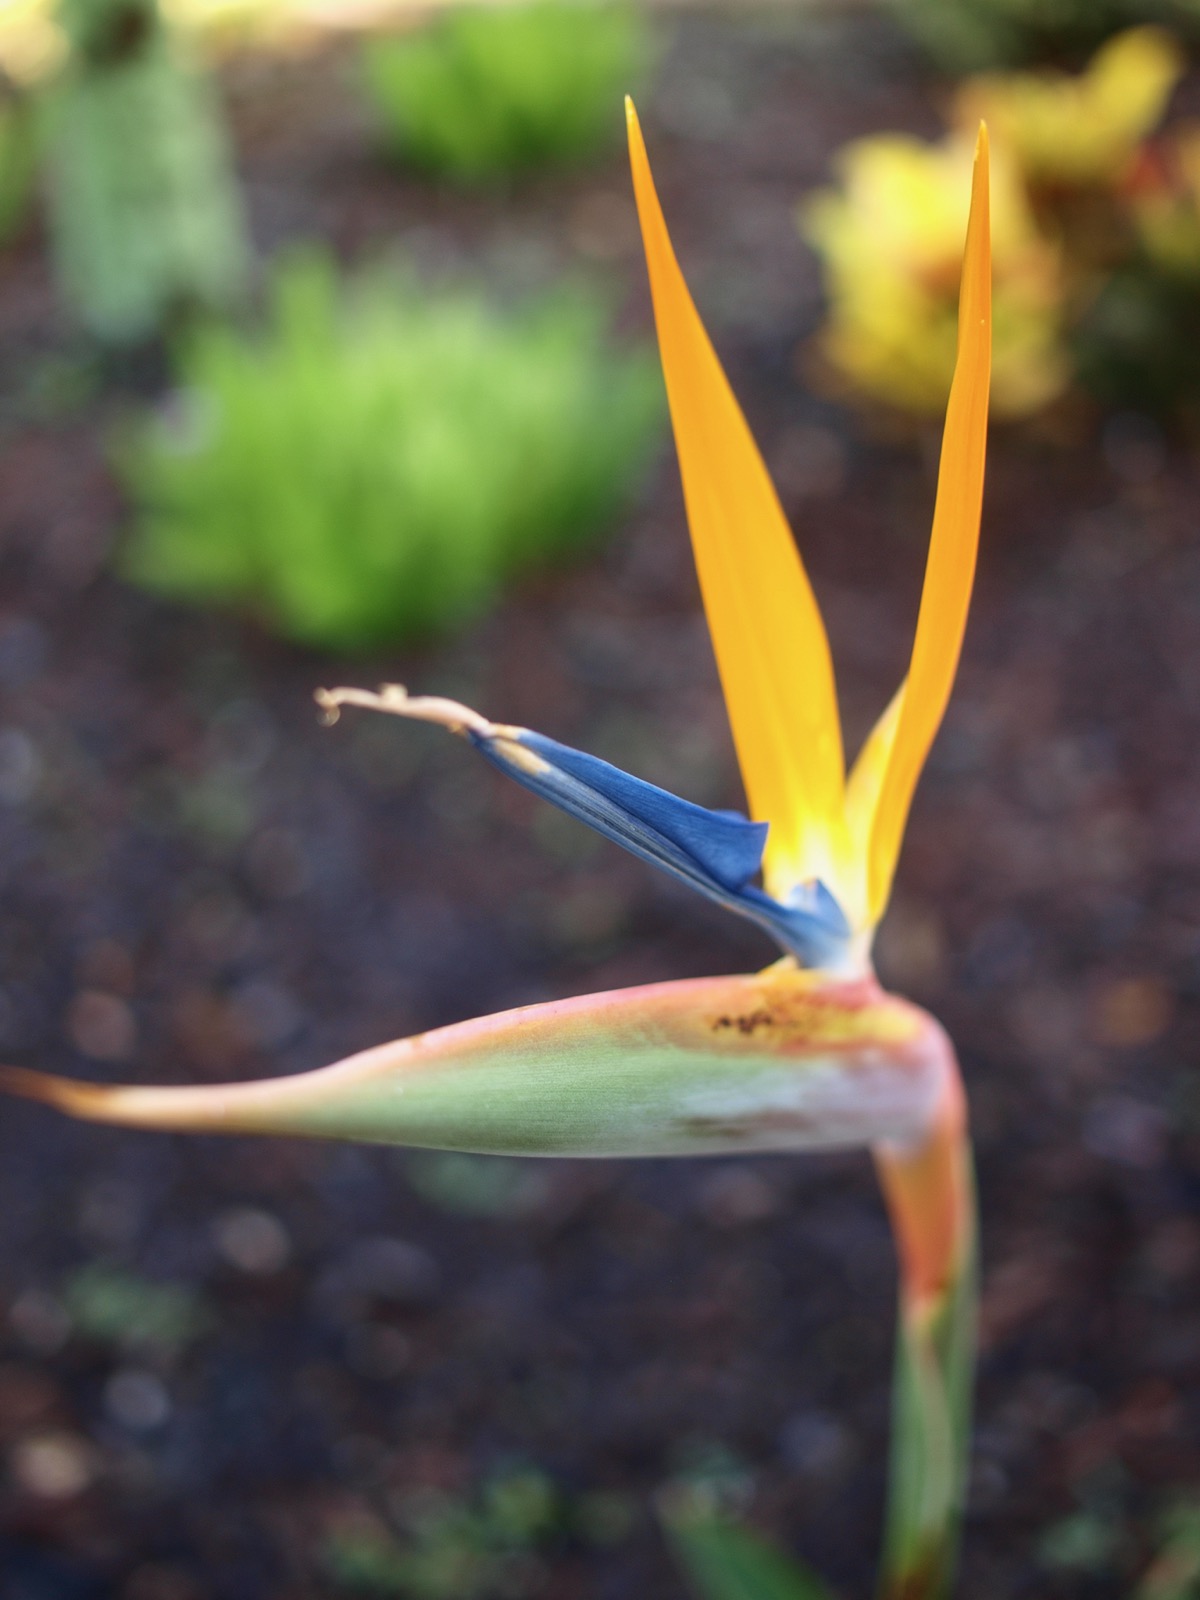 Blossom of a bird-of-paradise plant, two bright yellow-orange vertical petals, blue petals beneath and the red/green case below that.